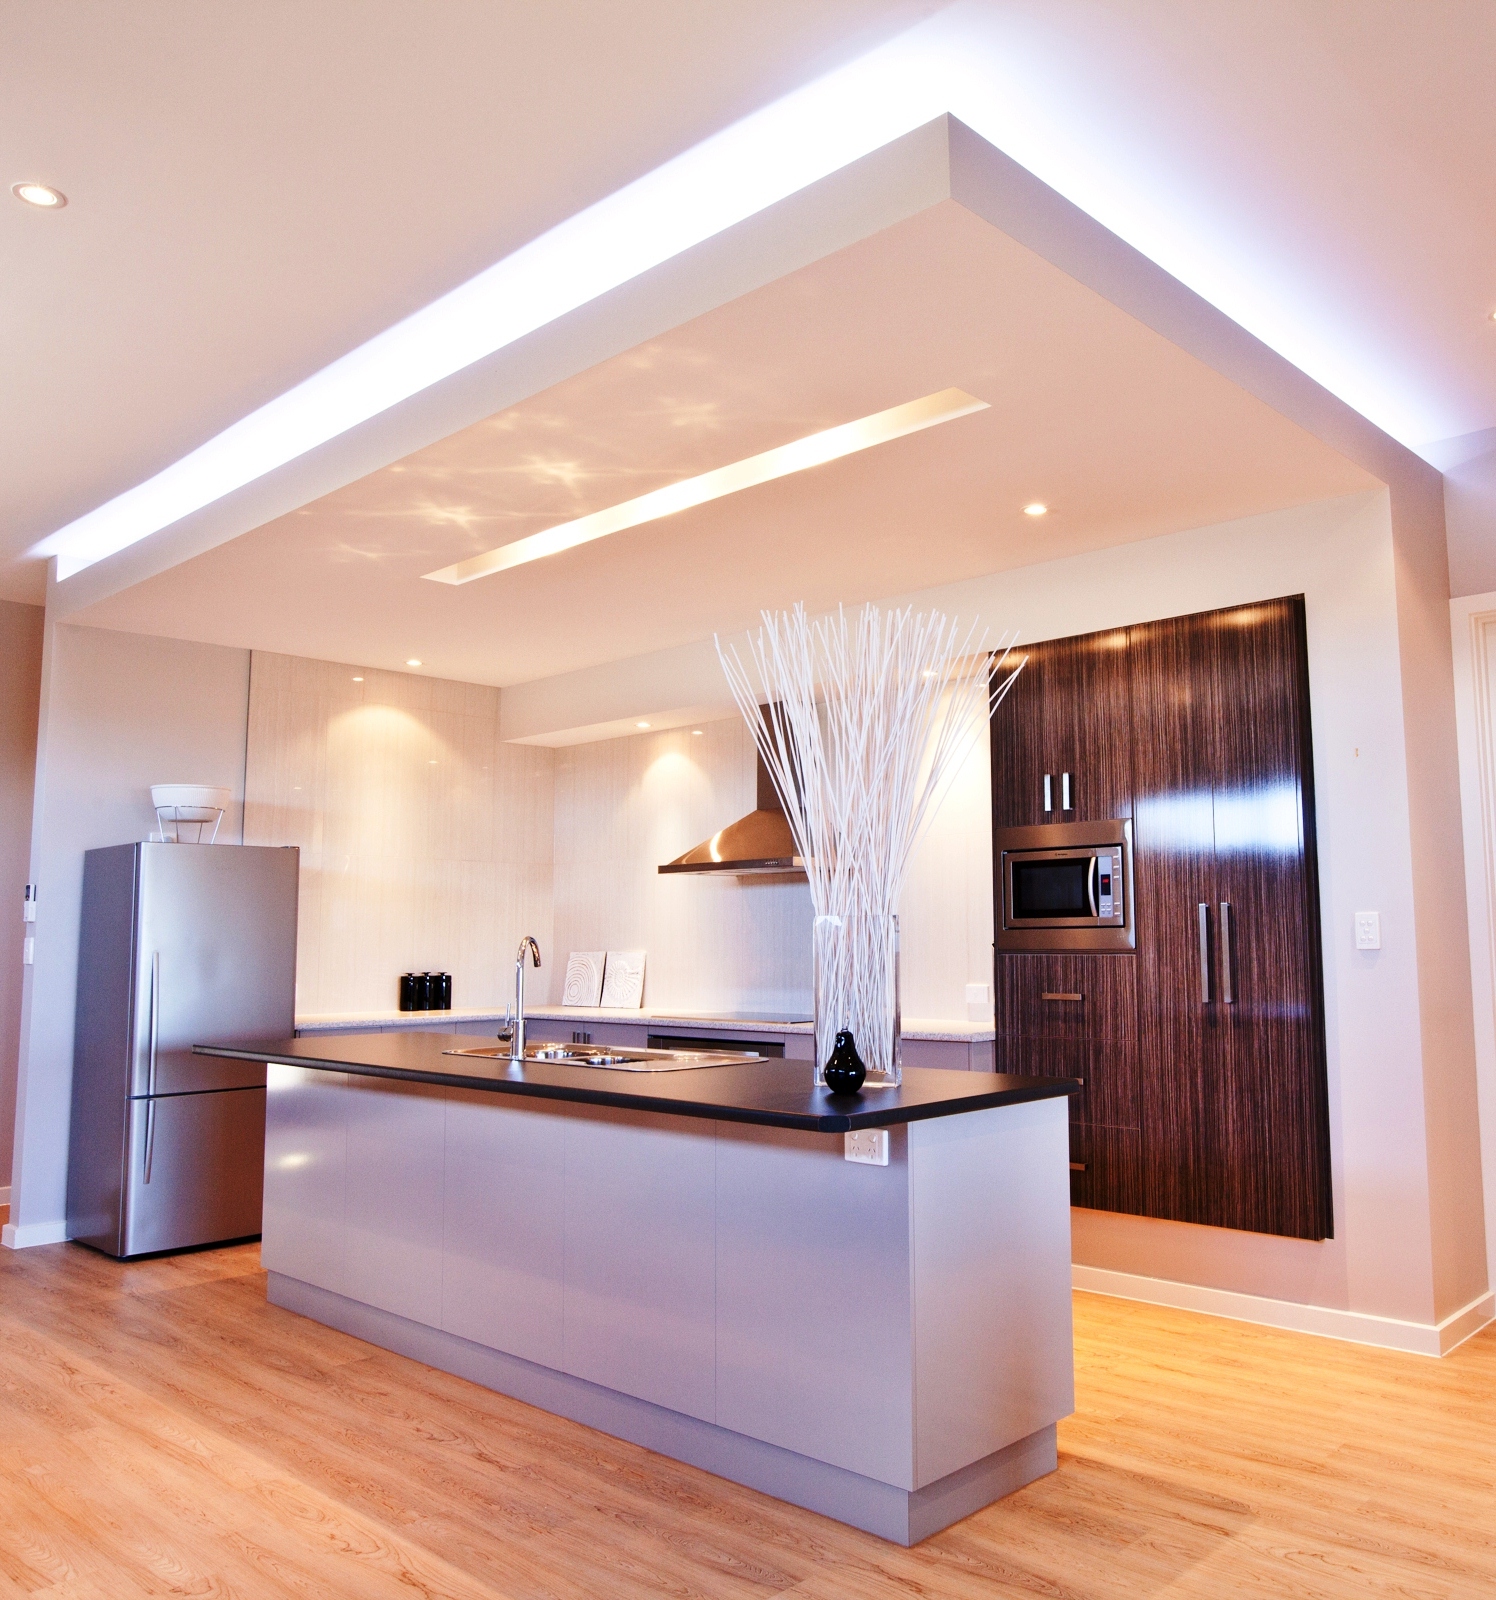 INCREASE YOUR PROPERTY'S VALUE - with a well-designed new kitchen